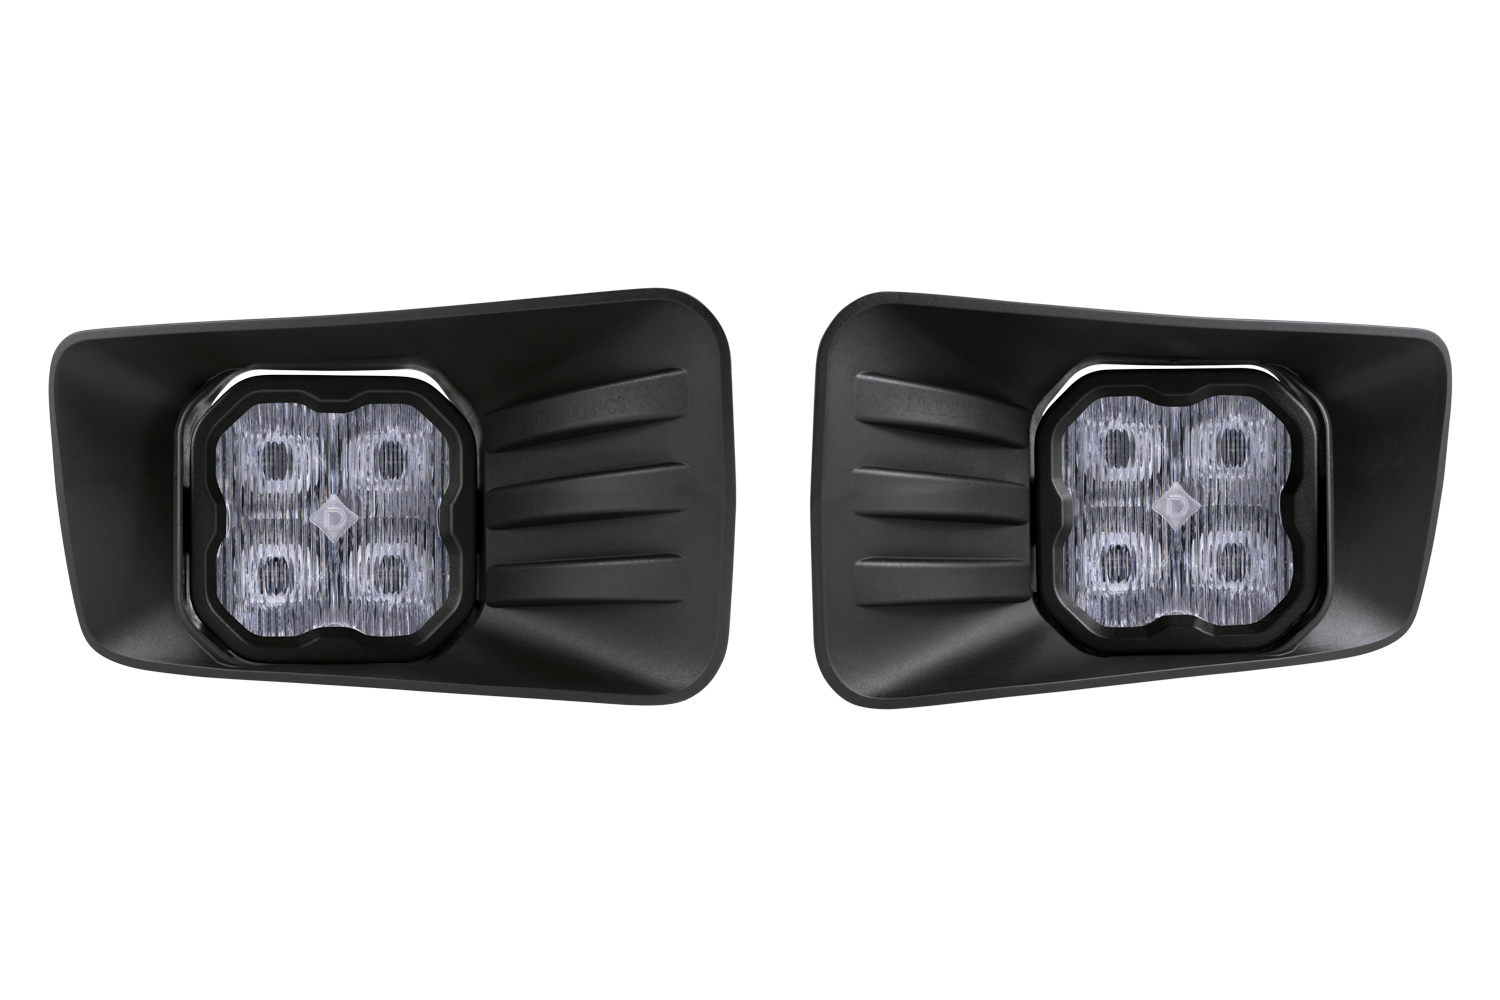 Diode Dynamics Automotive LED Lighting - Off Road, Bulbs, Headlights, and  more